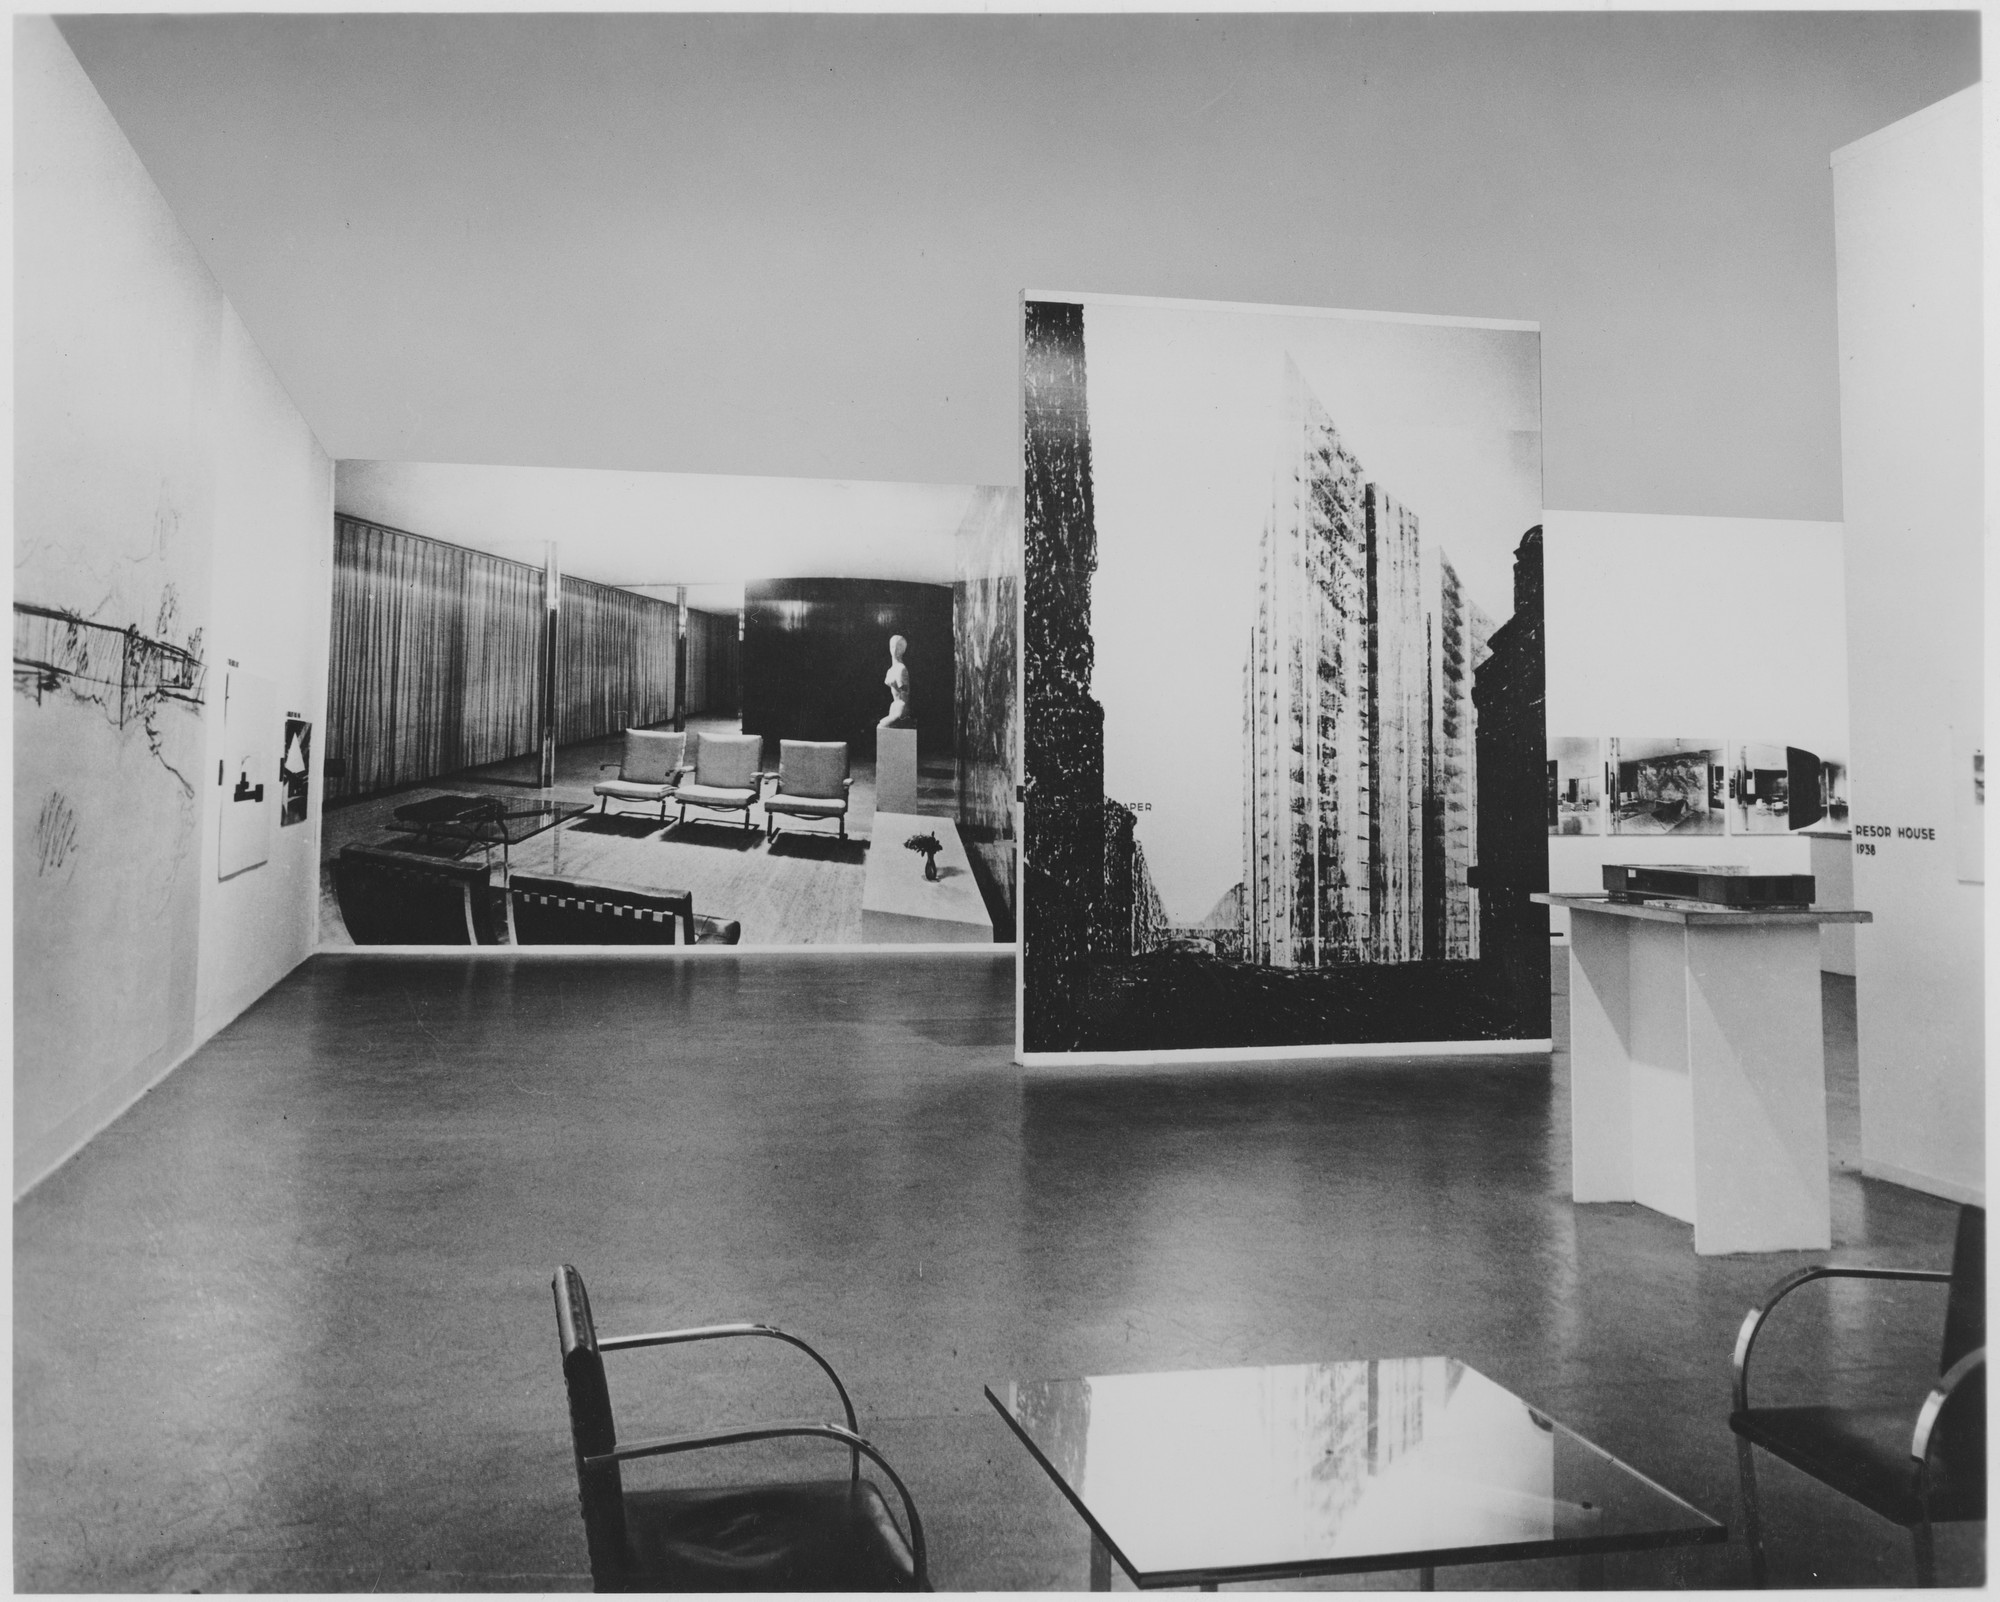 Eksperiment kollision hold Installation view of the exhibition, "Mies van der Rohe" | MoMA